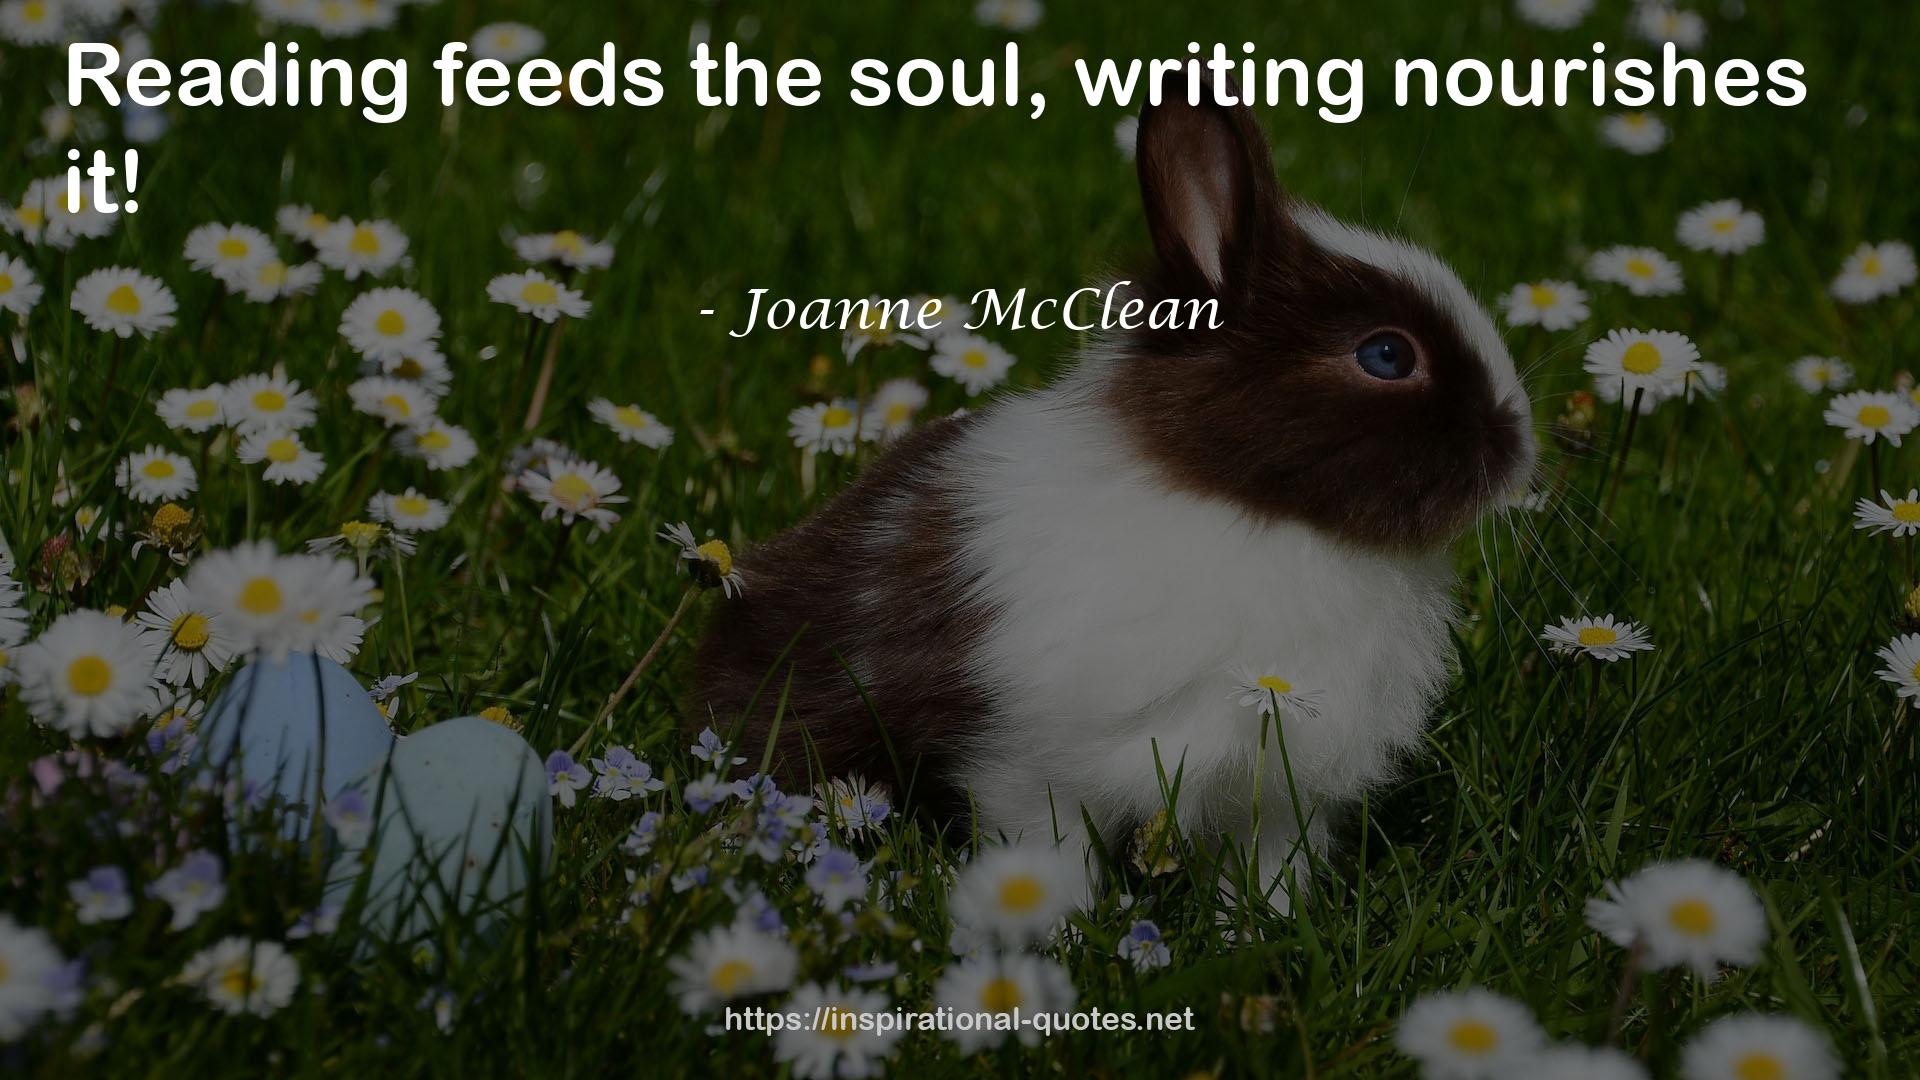 Joanne McClean QUOTES